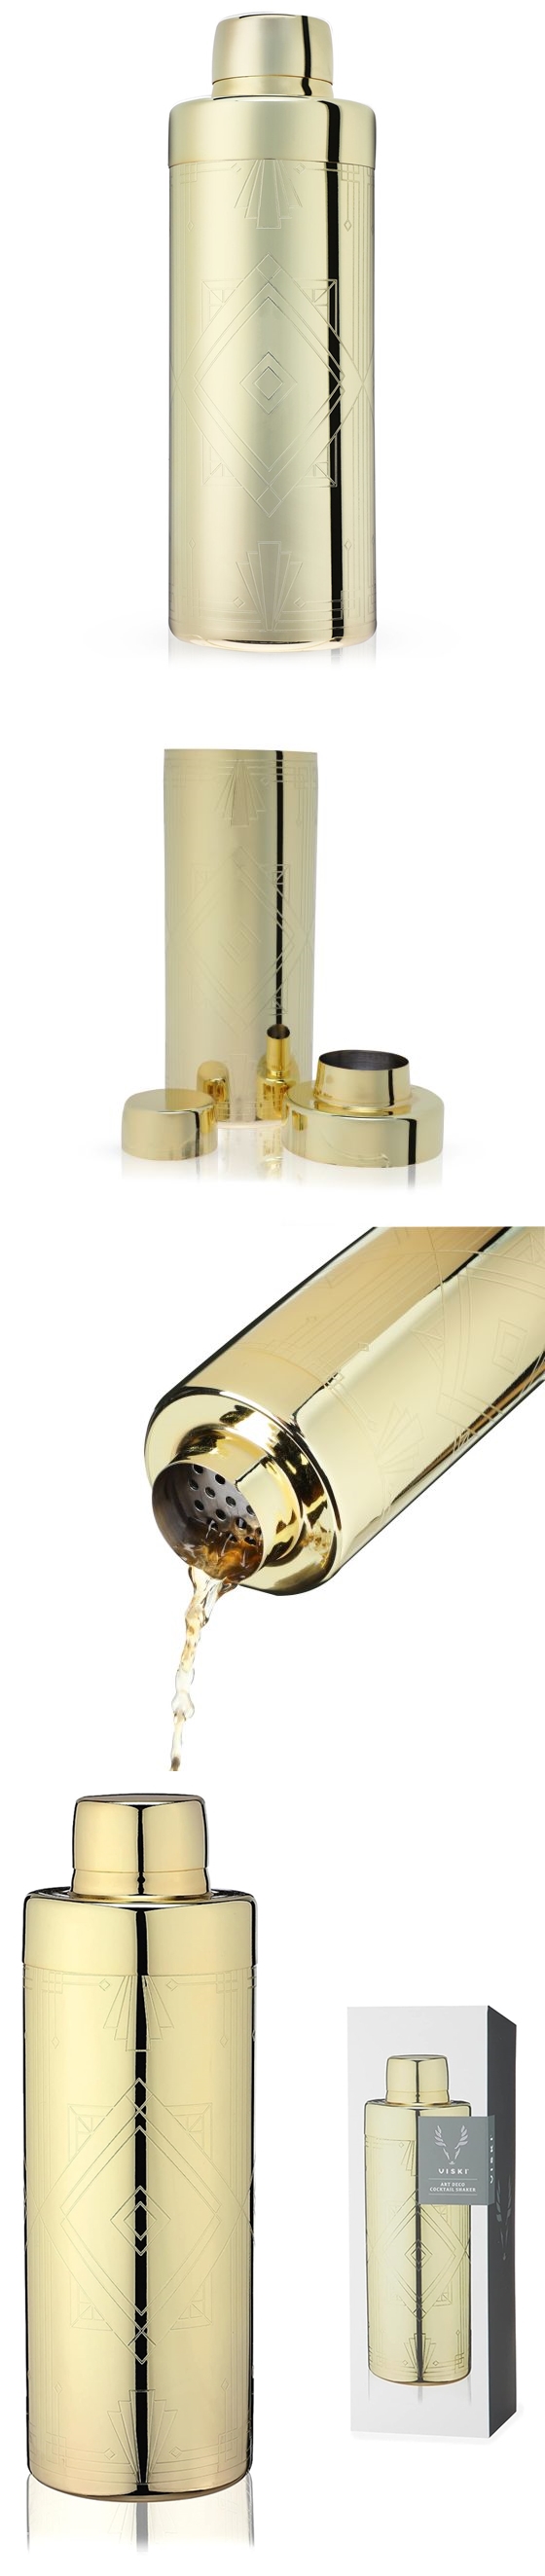 Art Deco Gold-Plated Cocktail Shaker with Elegant Etchings by VISKI